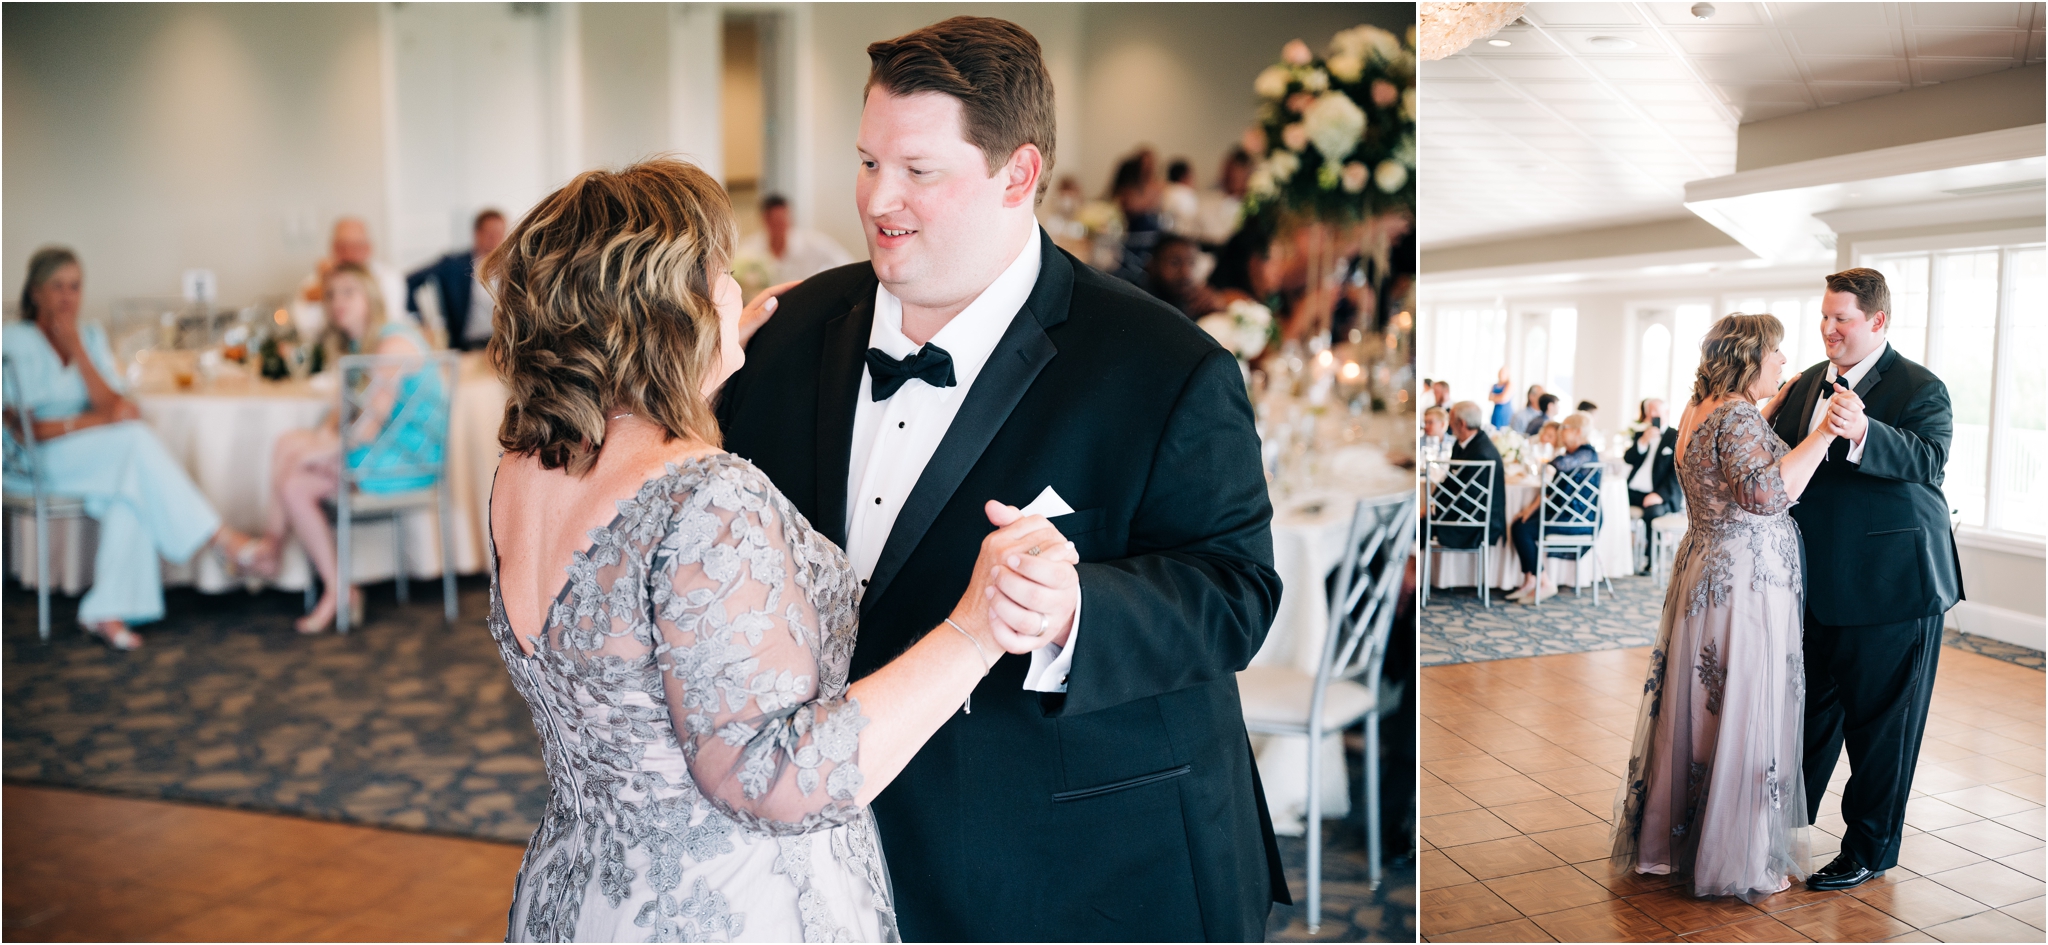 adorable mother and son photo inside chatham hills reception